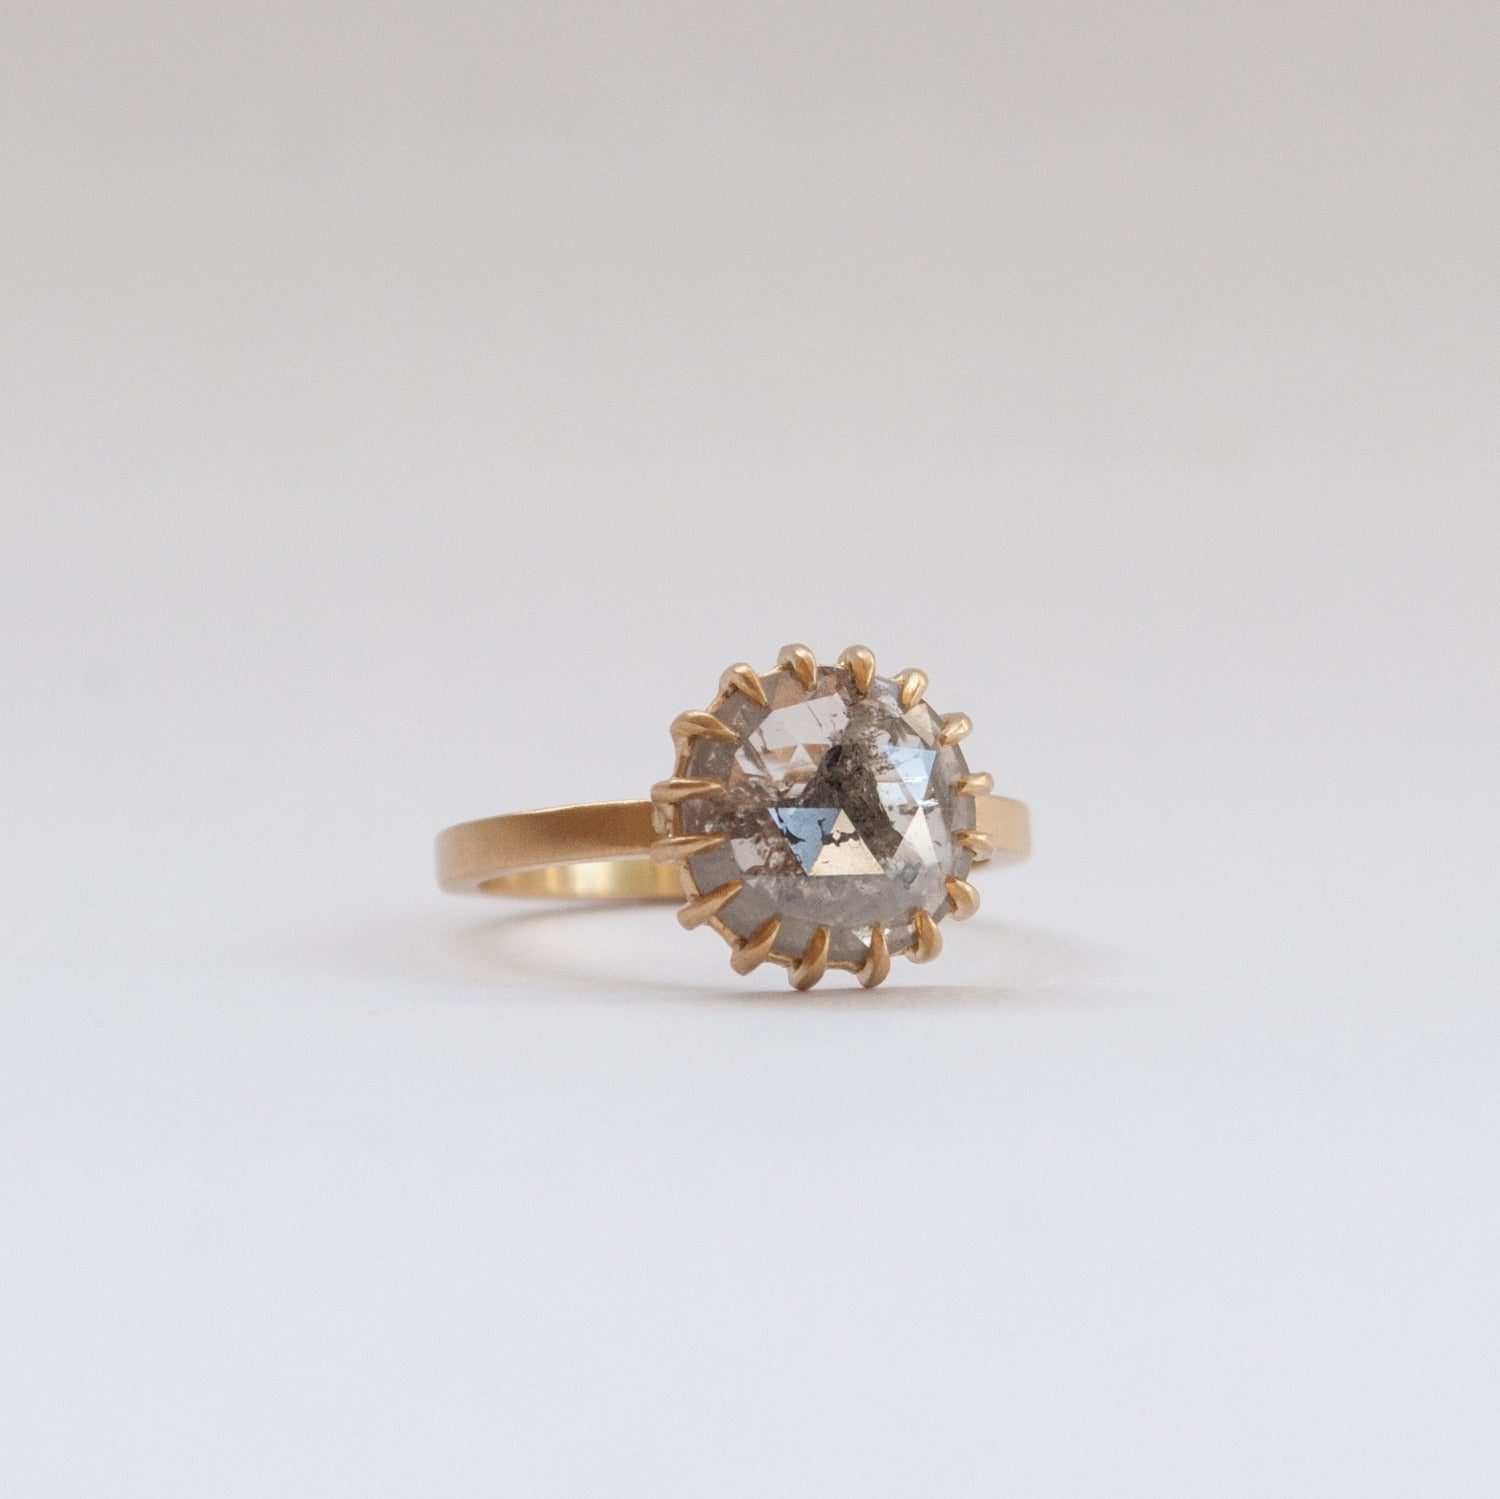 Sarah Swell Soleil Solitaire Diamond Ring